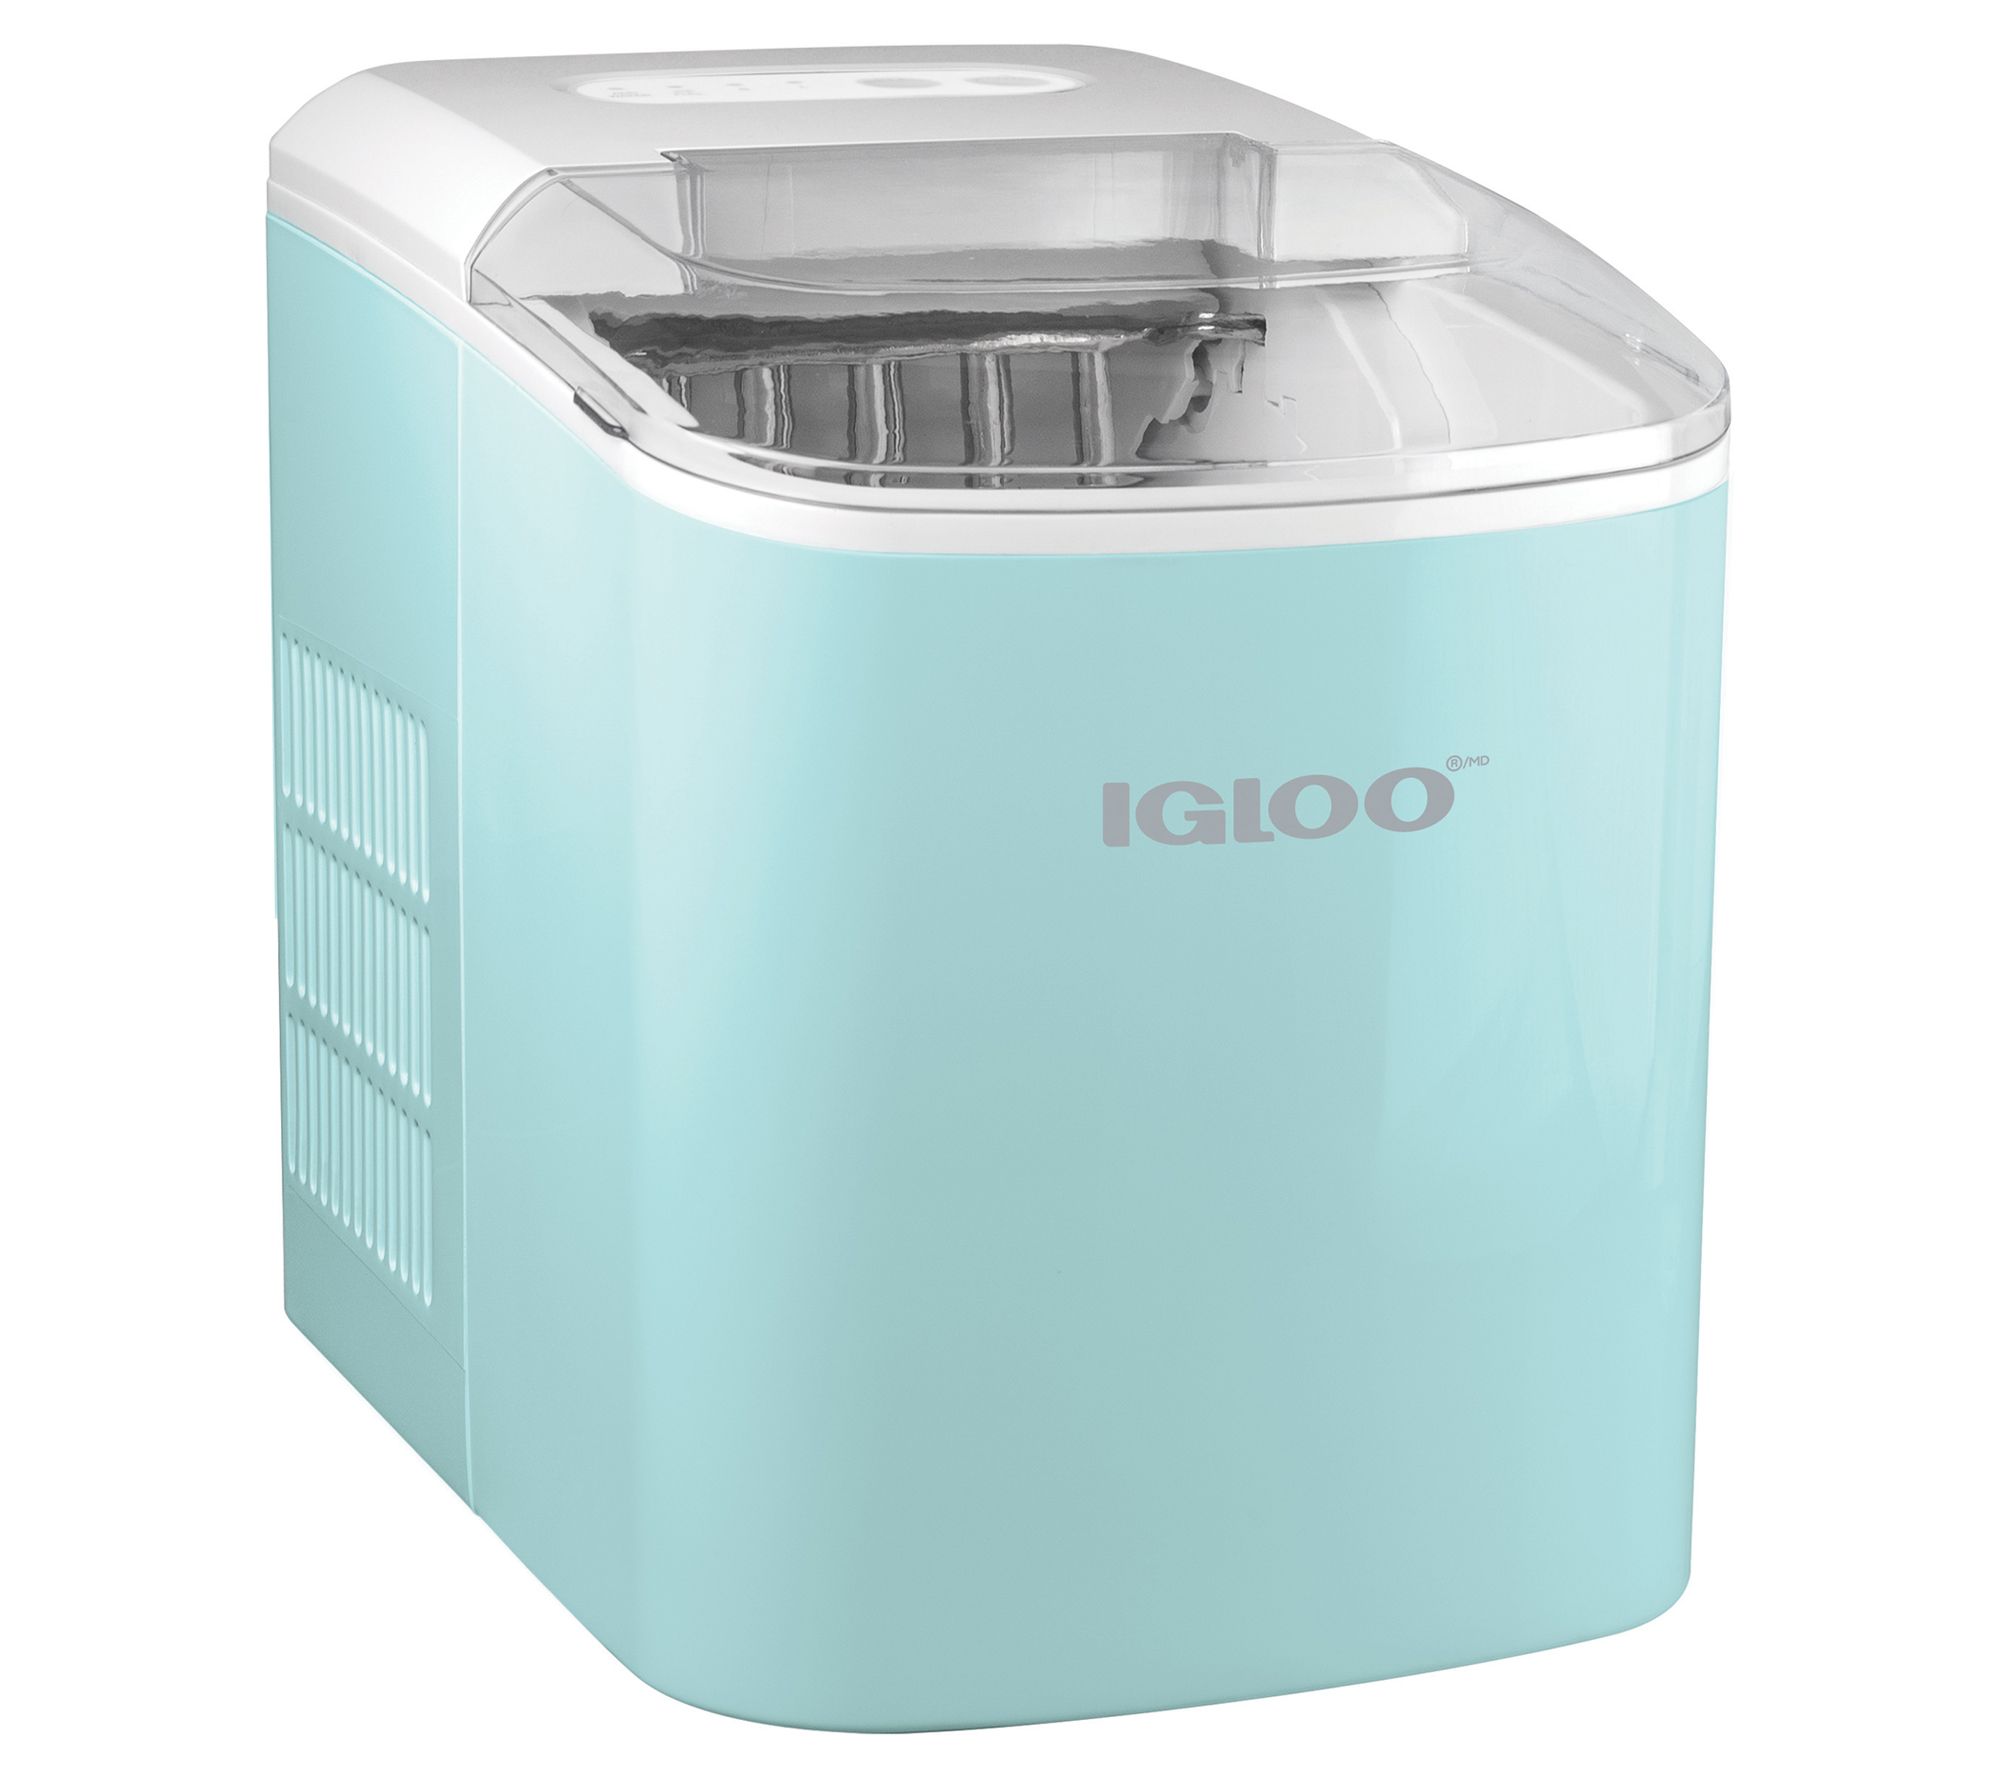 QVC  26 Pound Igloo Ice Maker For $59.98 :: Southern Savers